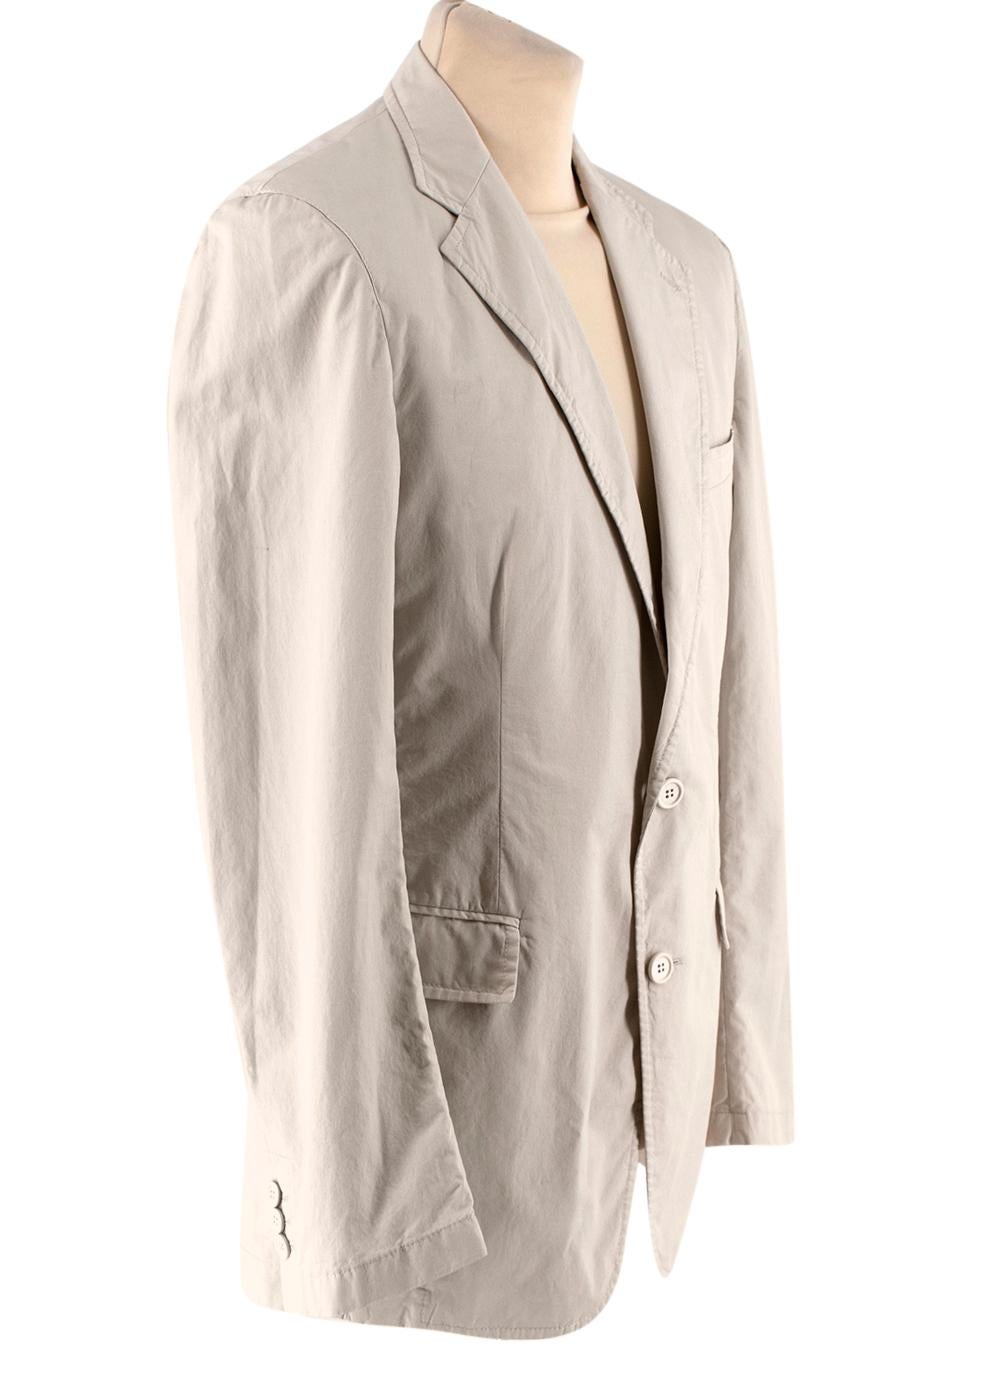 Prada Beige Cotton Single Breasted Blazer Jacket 

-Made of soft fresh cotton 
-Classic cut 
-Gorgeous beige neutral hue 
-Button fastening to the front 
-Buttoned cuffs 
-Vents to the back 
-3 pockets to the front 
-2 interior pockets 
-Timeless